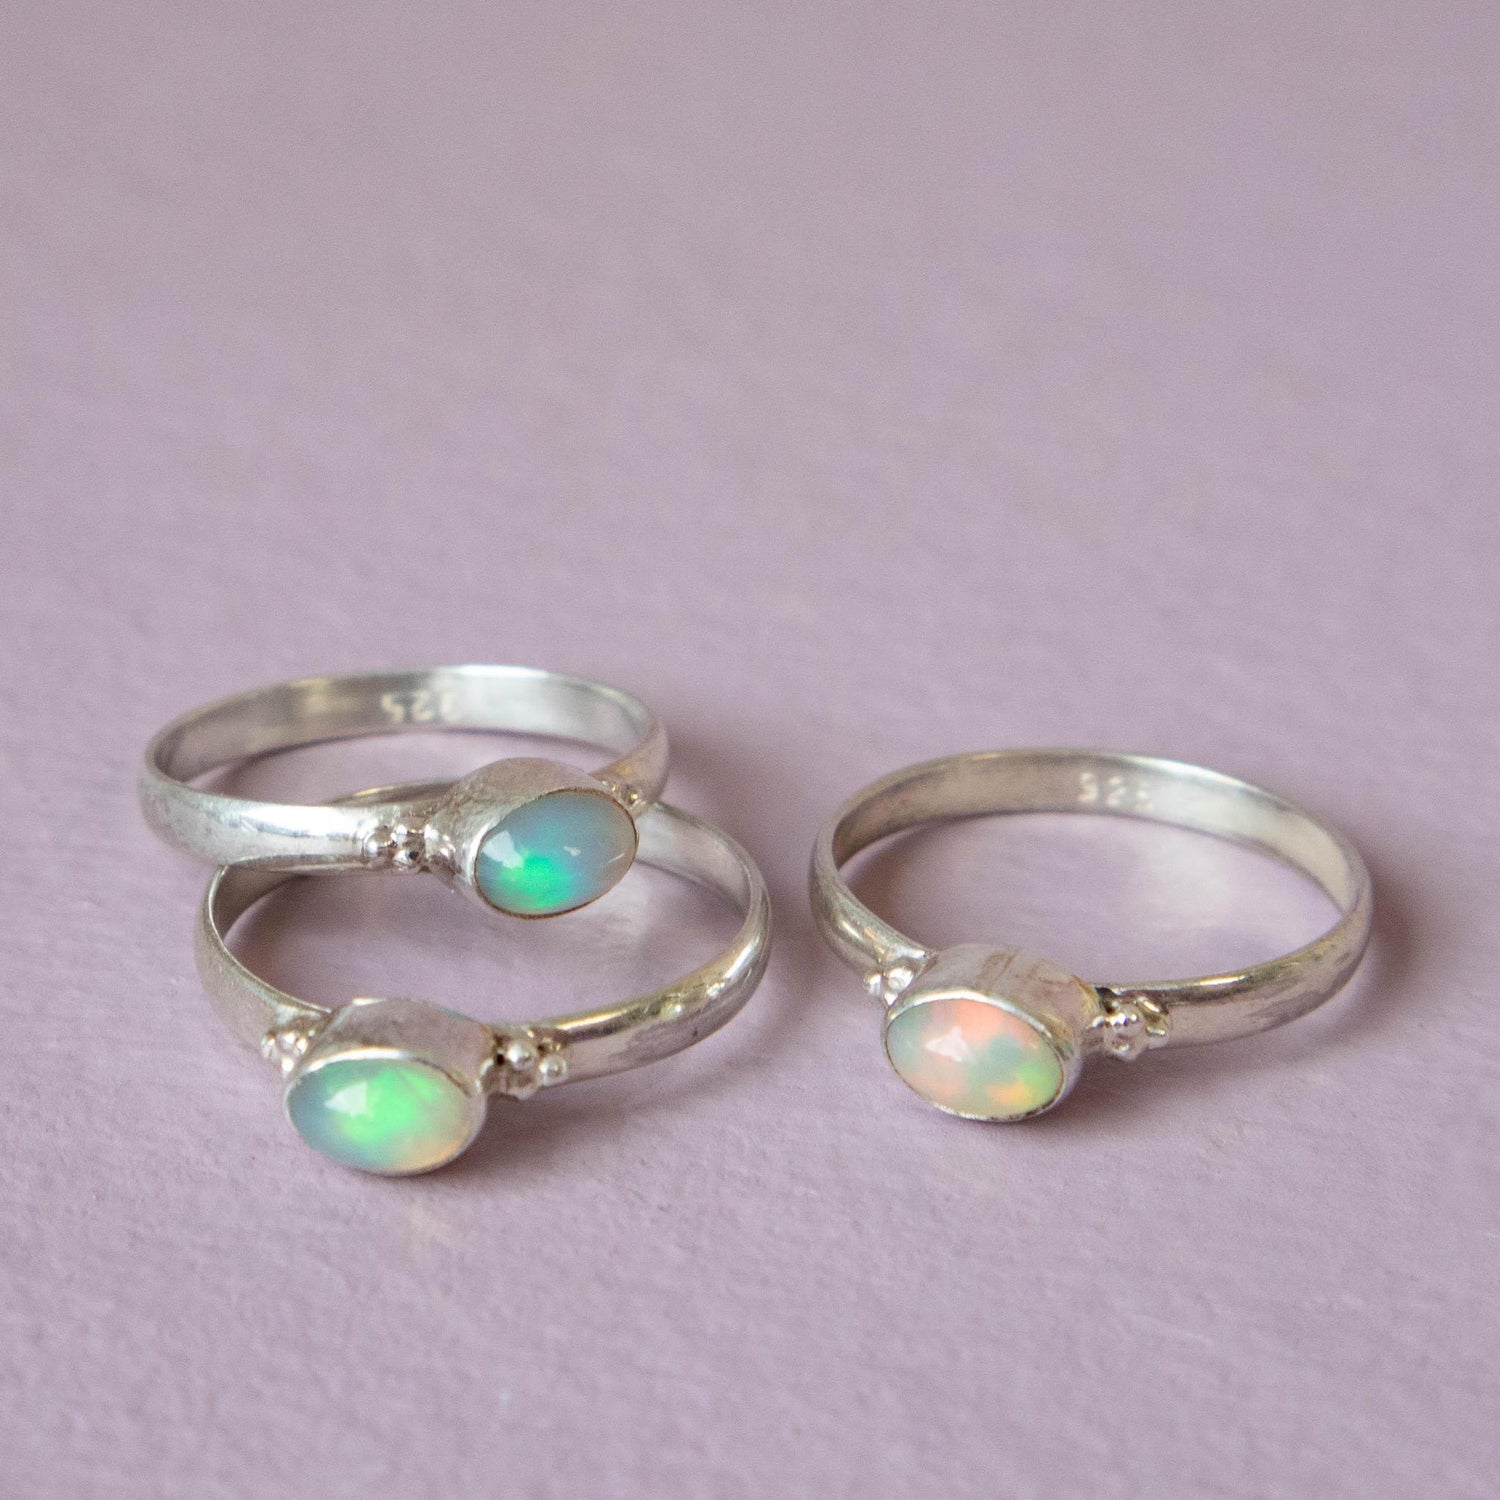 ethiopian opal, ethiopian opal ring, ethiopian opal jewelry, crystal ring, crystal jewelry, sterling silver ring, sterling silver opal ring, ethiopian opal crystal, ethiopian opal stone, ethiopian opal properties, ethiopian opal healing properties, ethiopian opal meaning, opal, opal ring, opal jewelry, opal crystal, opal stone, opal properties, opal healing properties, opal metaphysical properties, opal meaning